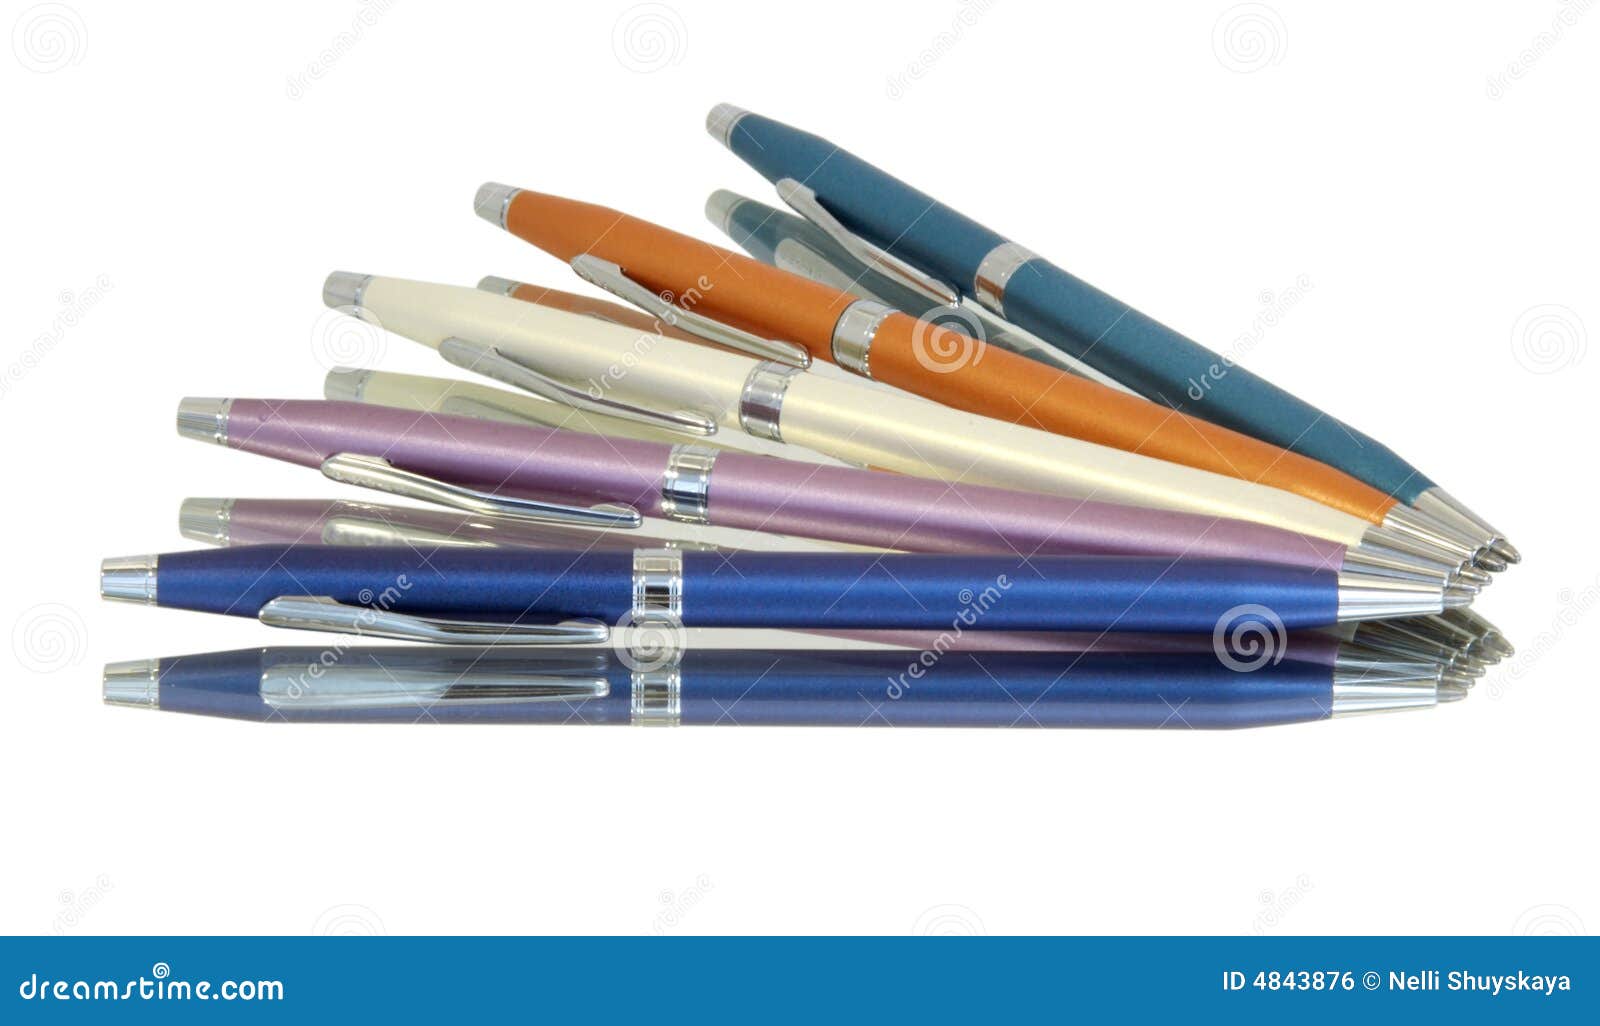 Pens. Five handles on a mirror separately